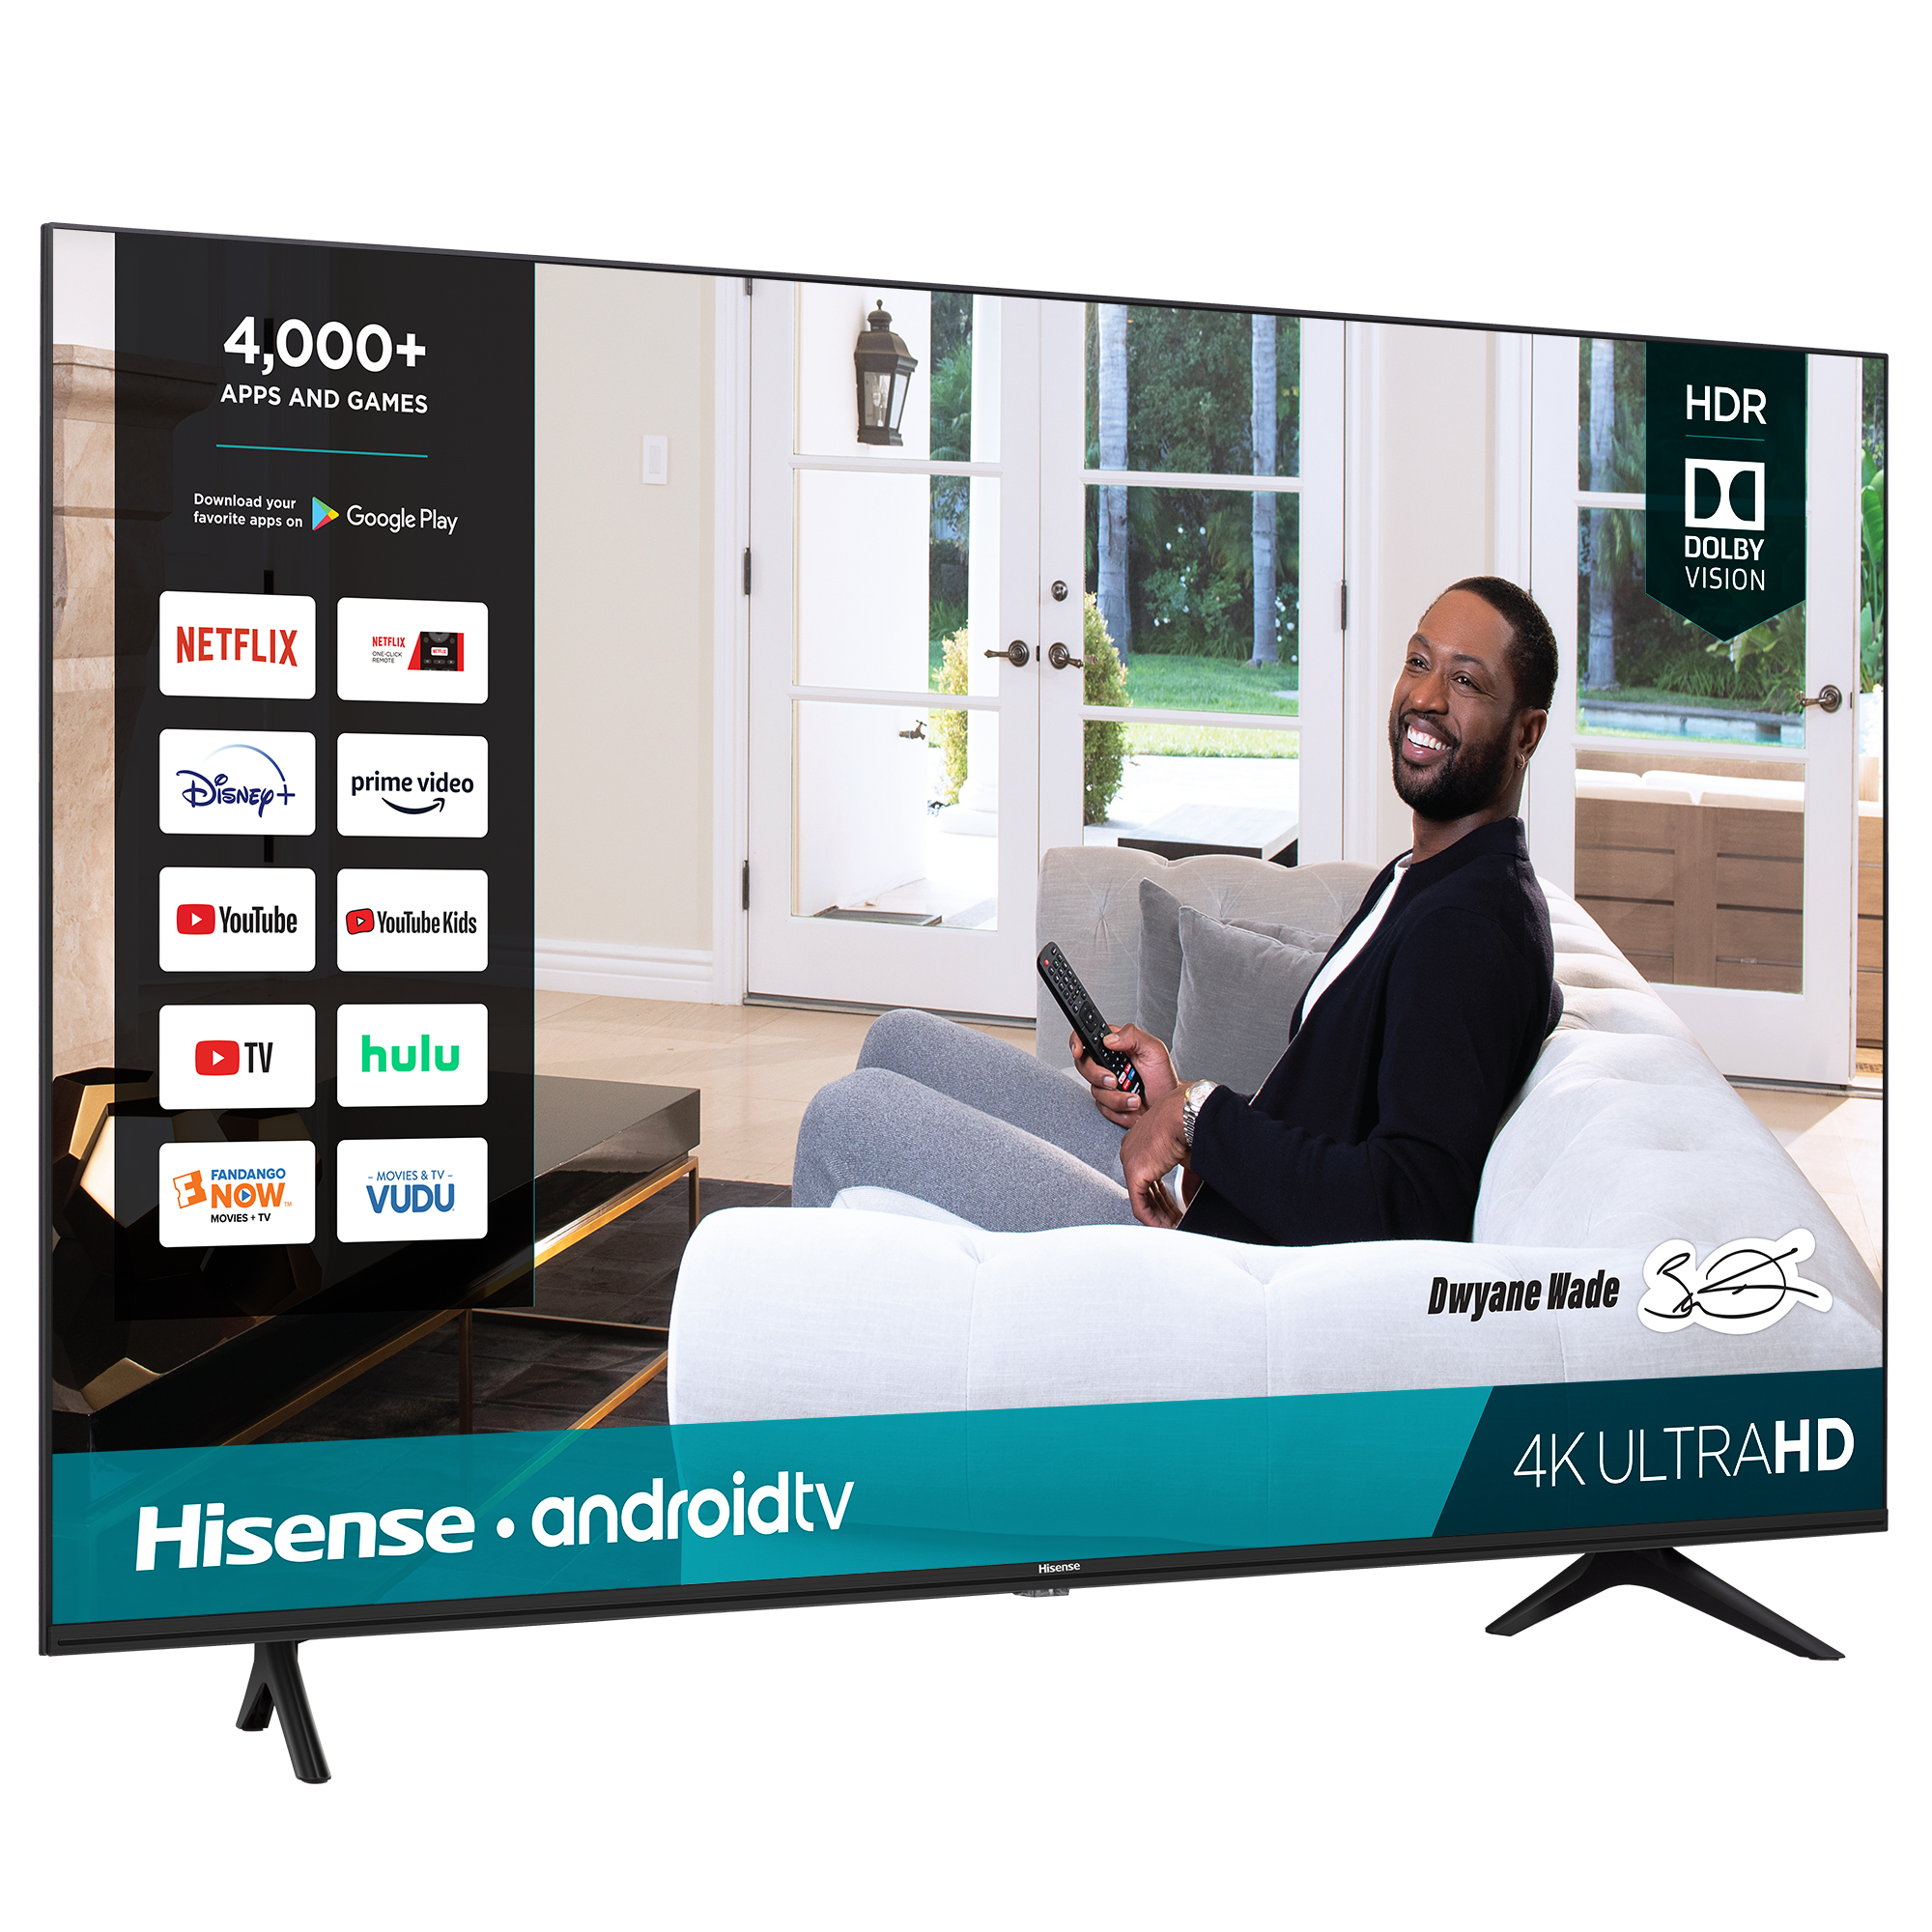 Hisense 43 inch H65-Series 4K UHD Smart Android TV (43H6570G) - image 6 of 11